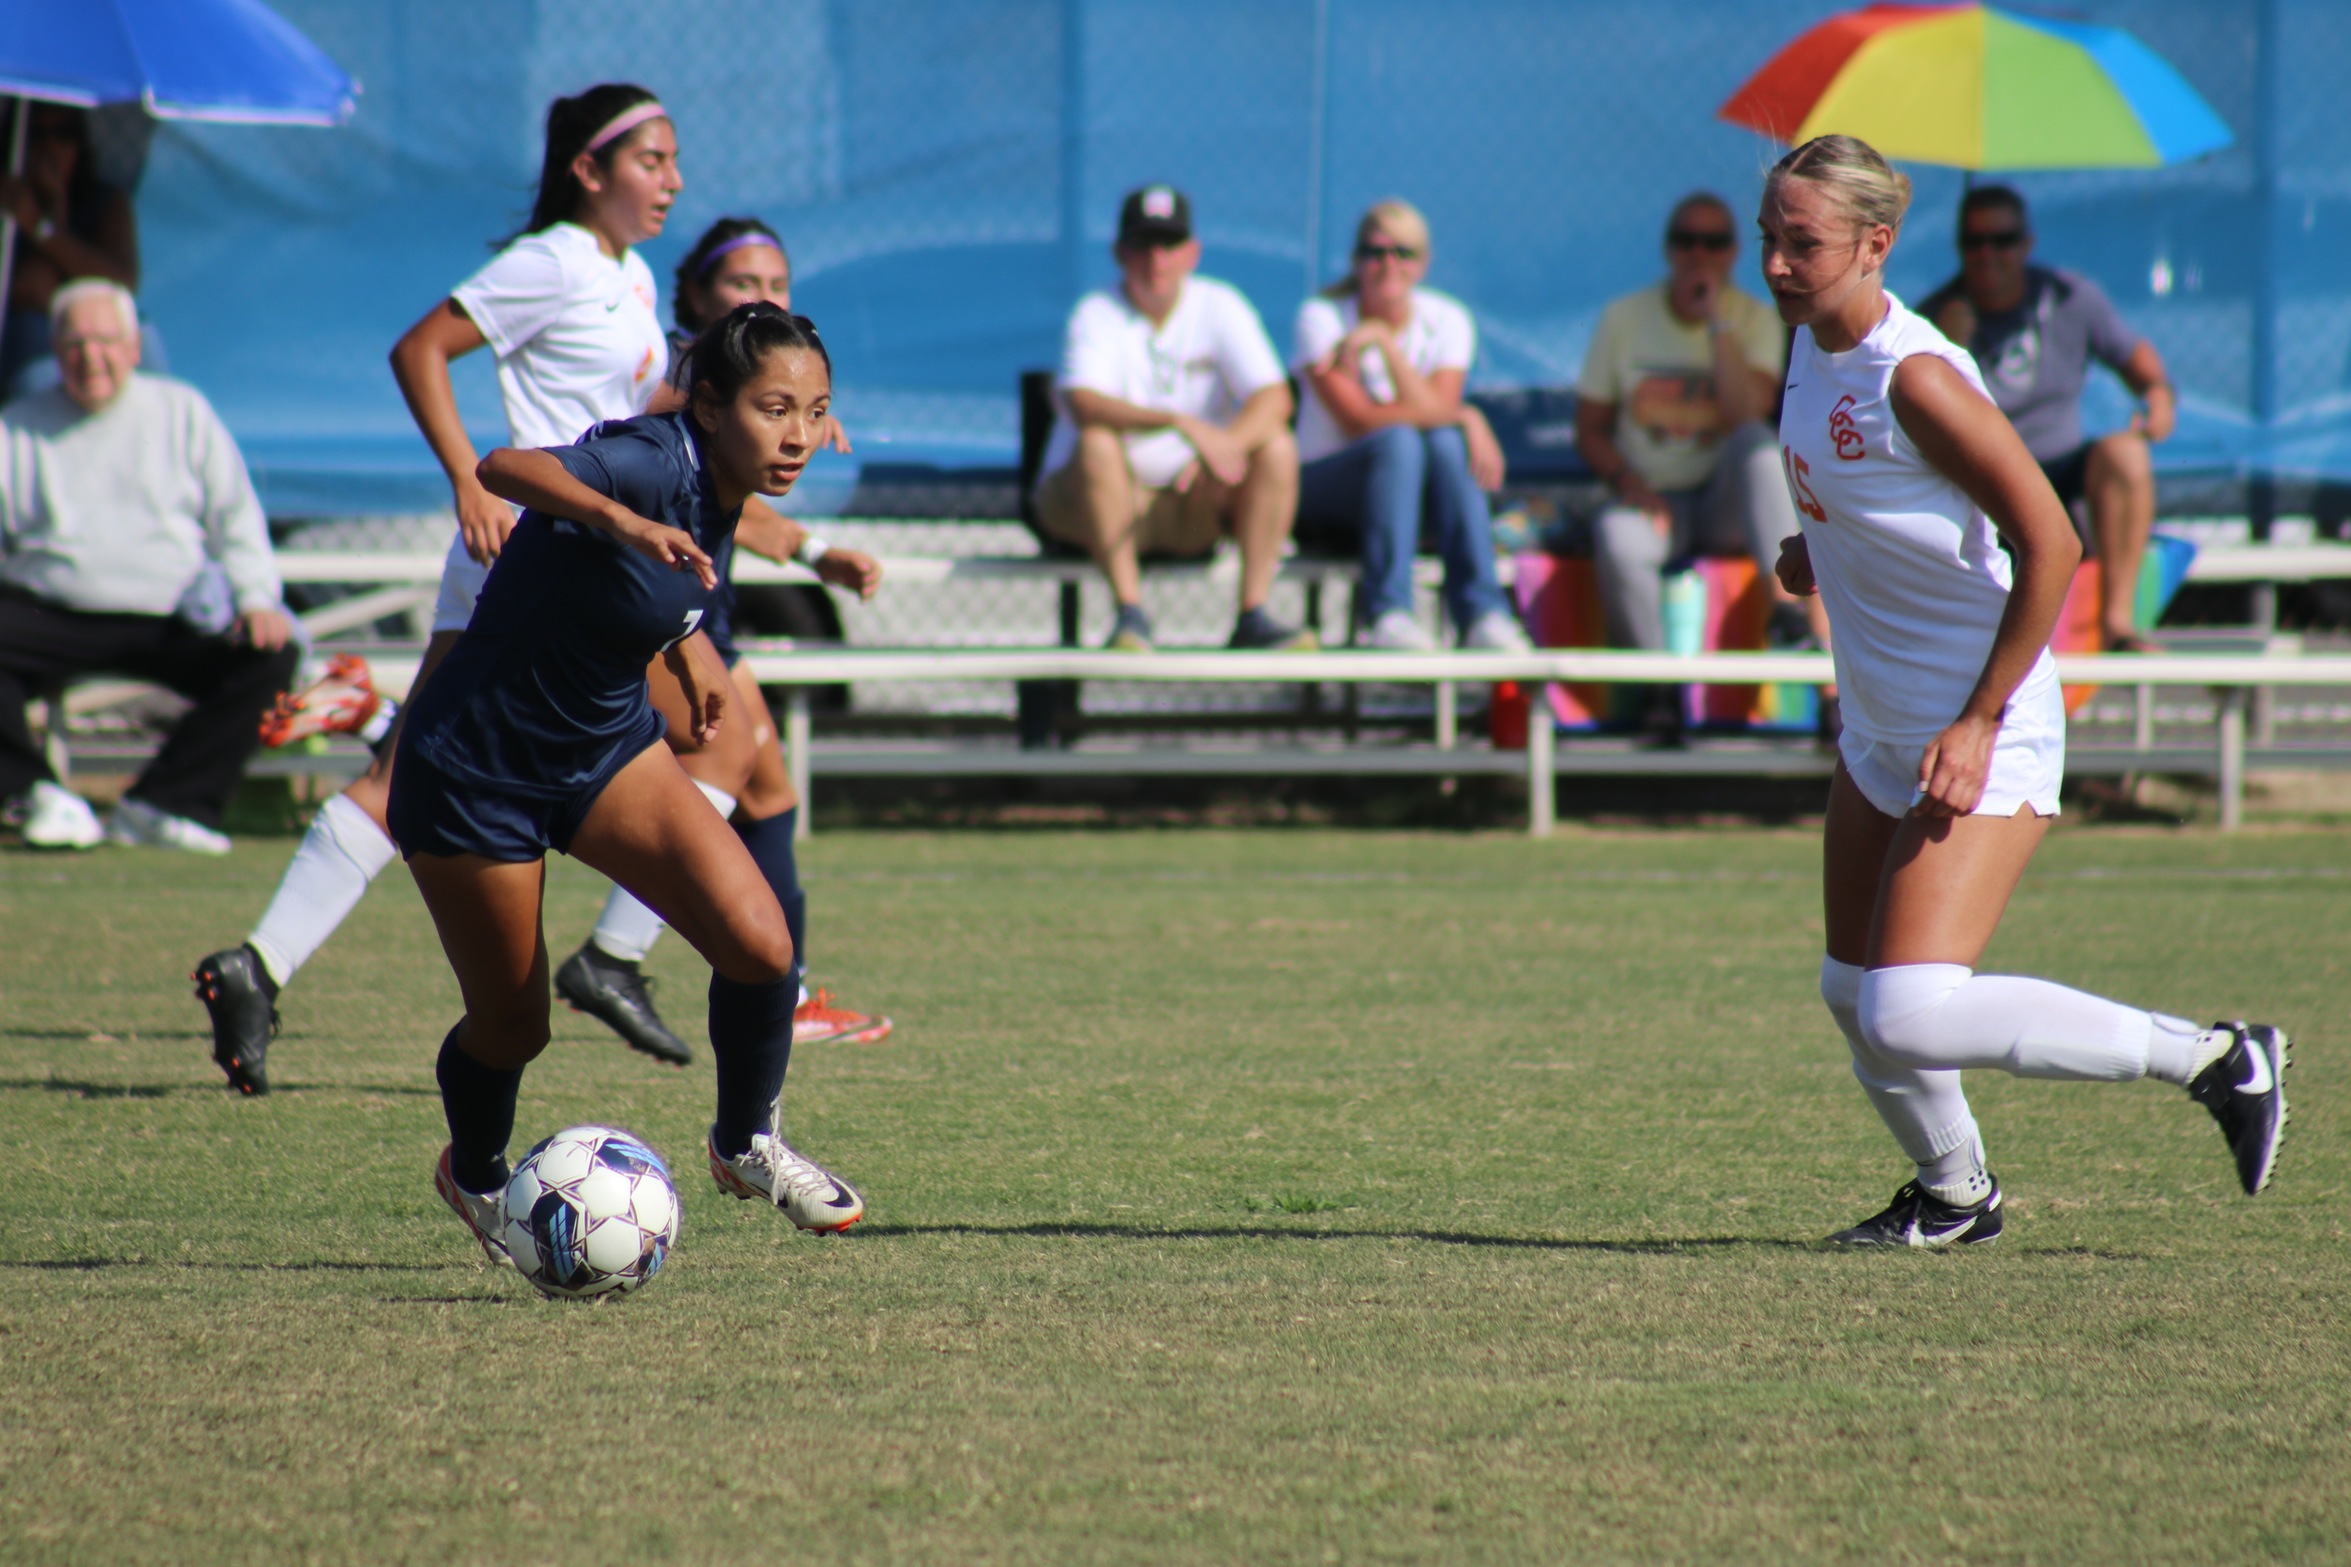 SECOND HALF WIND HELPS PIRATES SAIL PAST FULLERTON